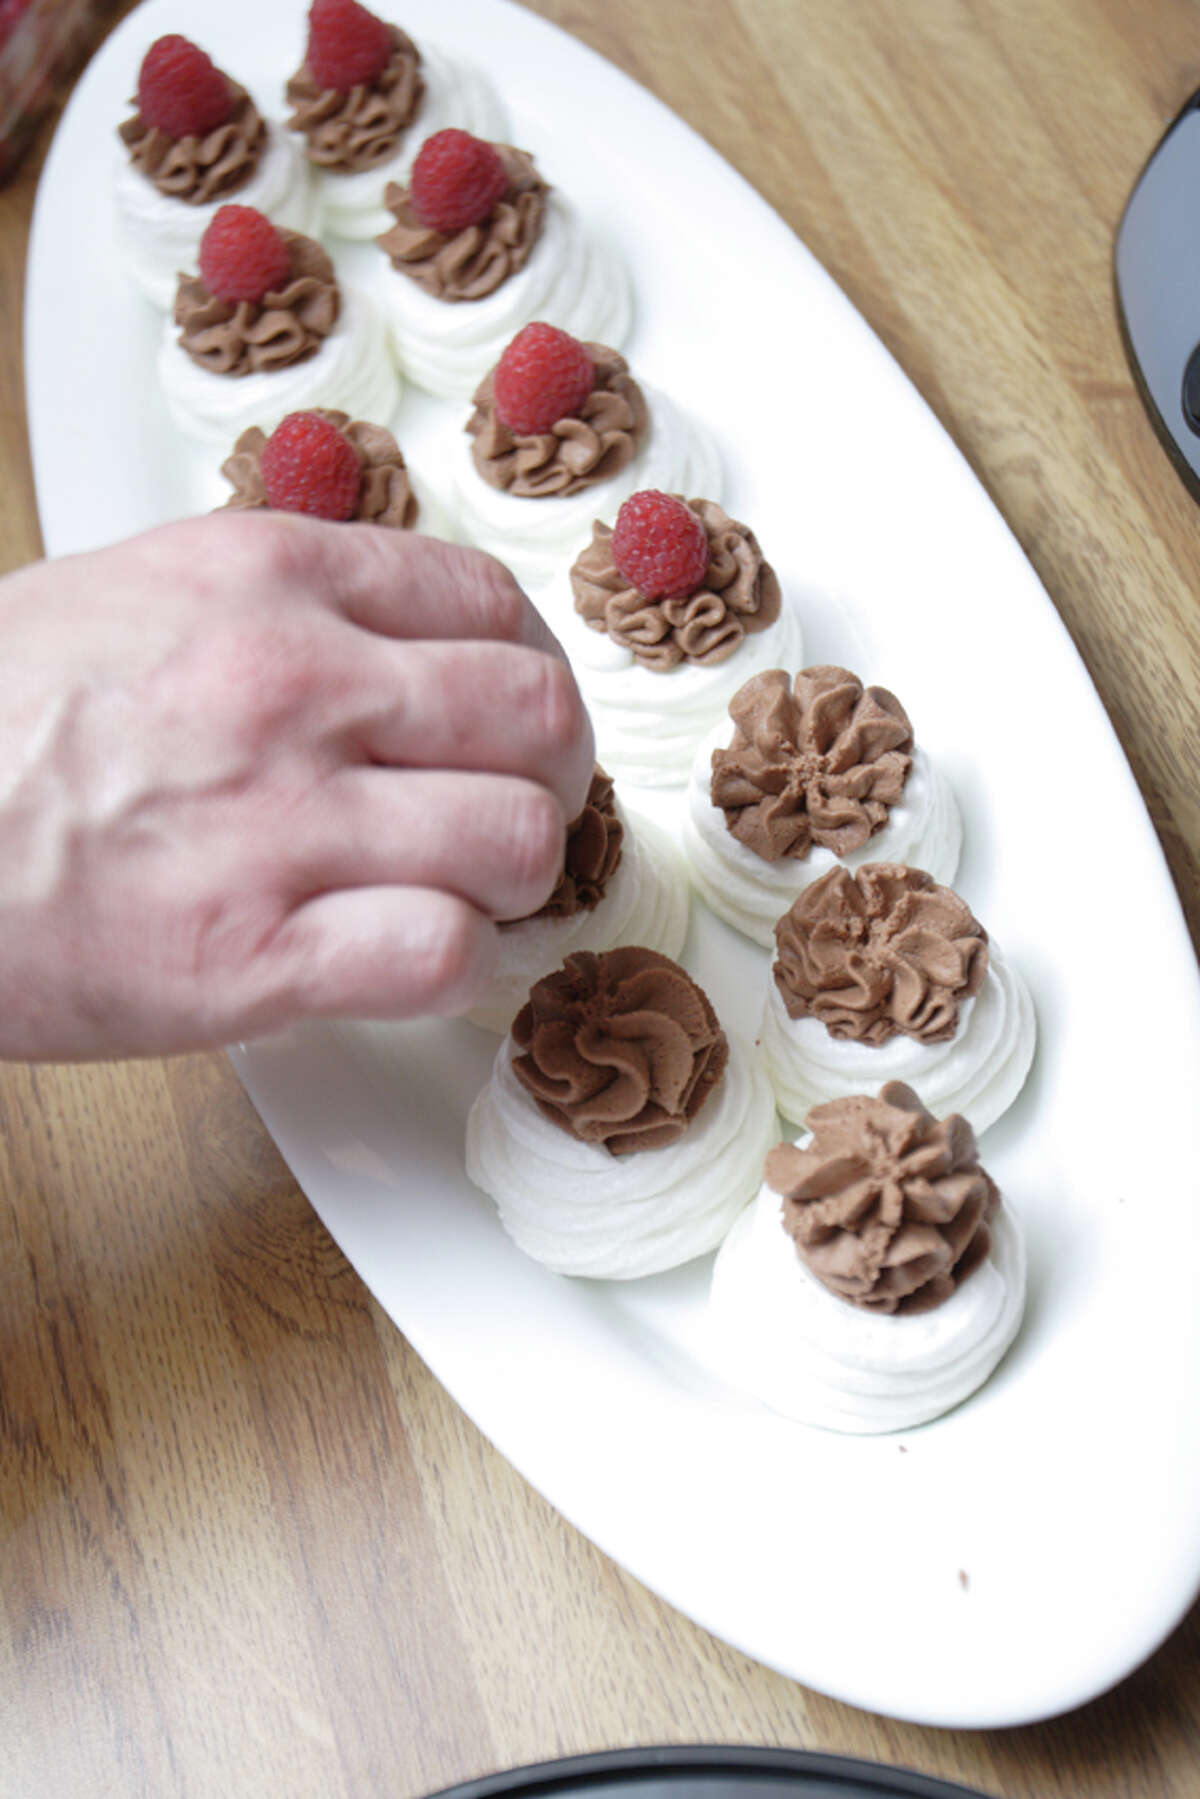 Chef Patrick Longton puts the finishing touches on his mini meringues with chocolate mousse. (Suzanne Kawola/Life@Home) Click here to read the story, and here to get the recipe.